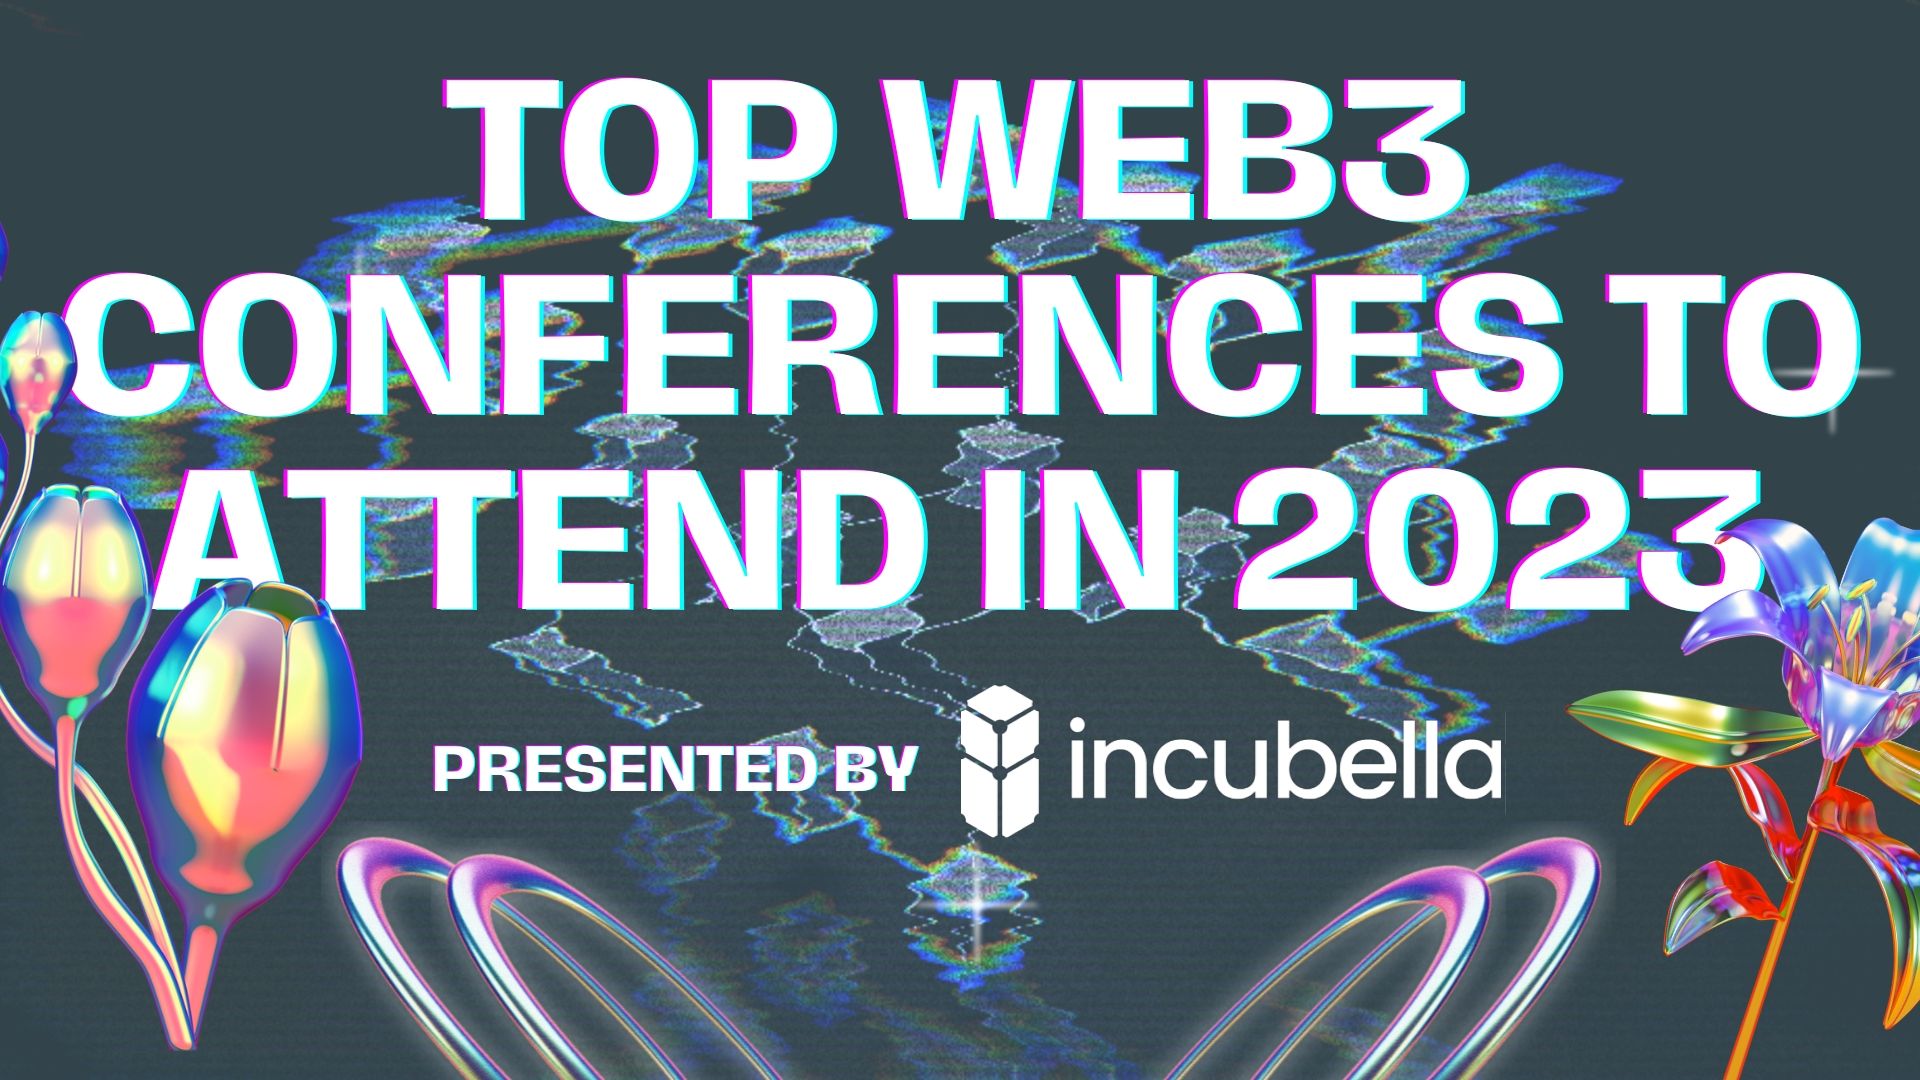 Top Web3 Conferences to Attend in 2023 by Incubella